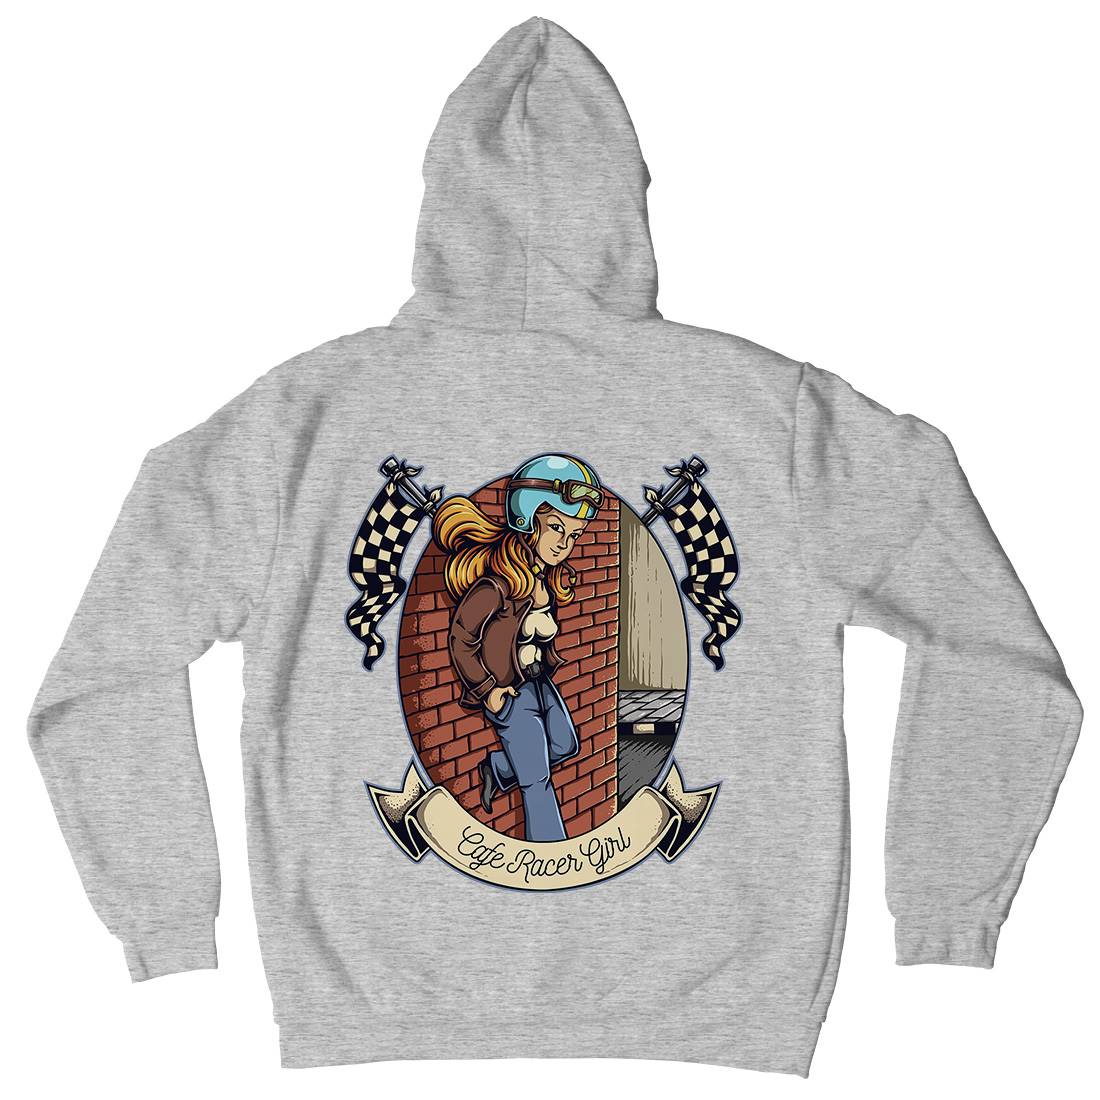 Racer Girl Mens Hoodie With Pocket Cars A456